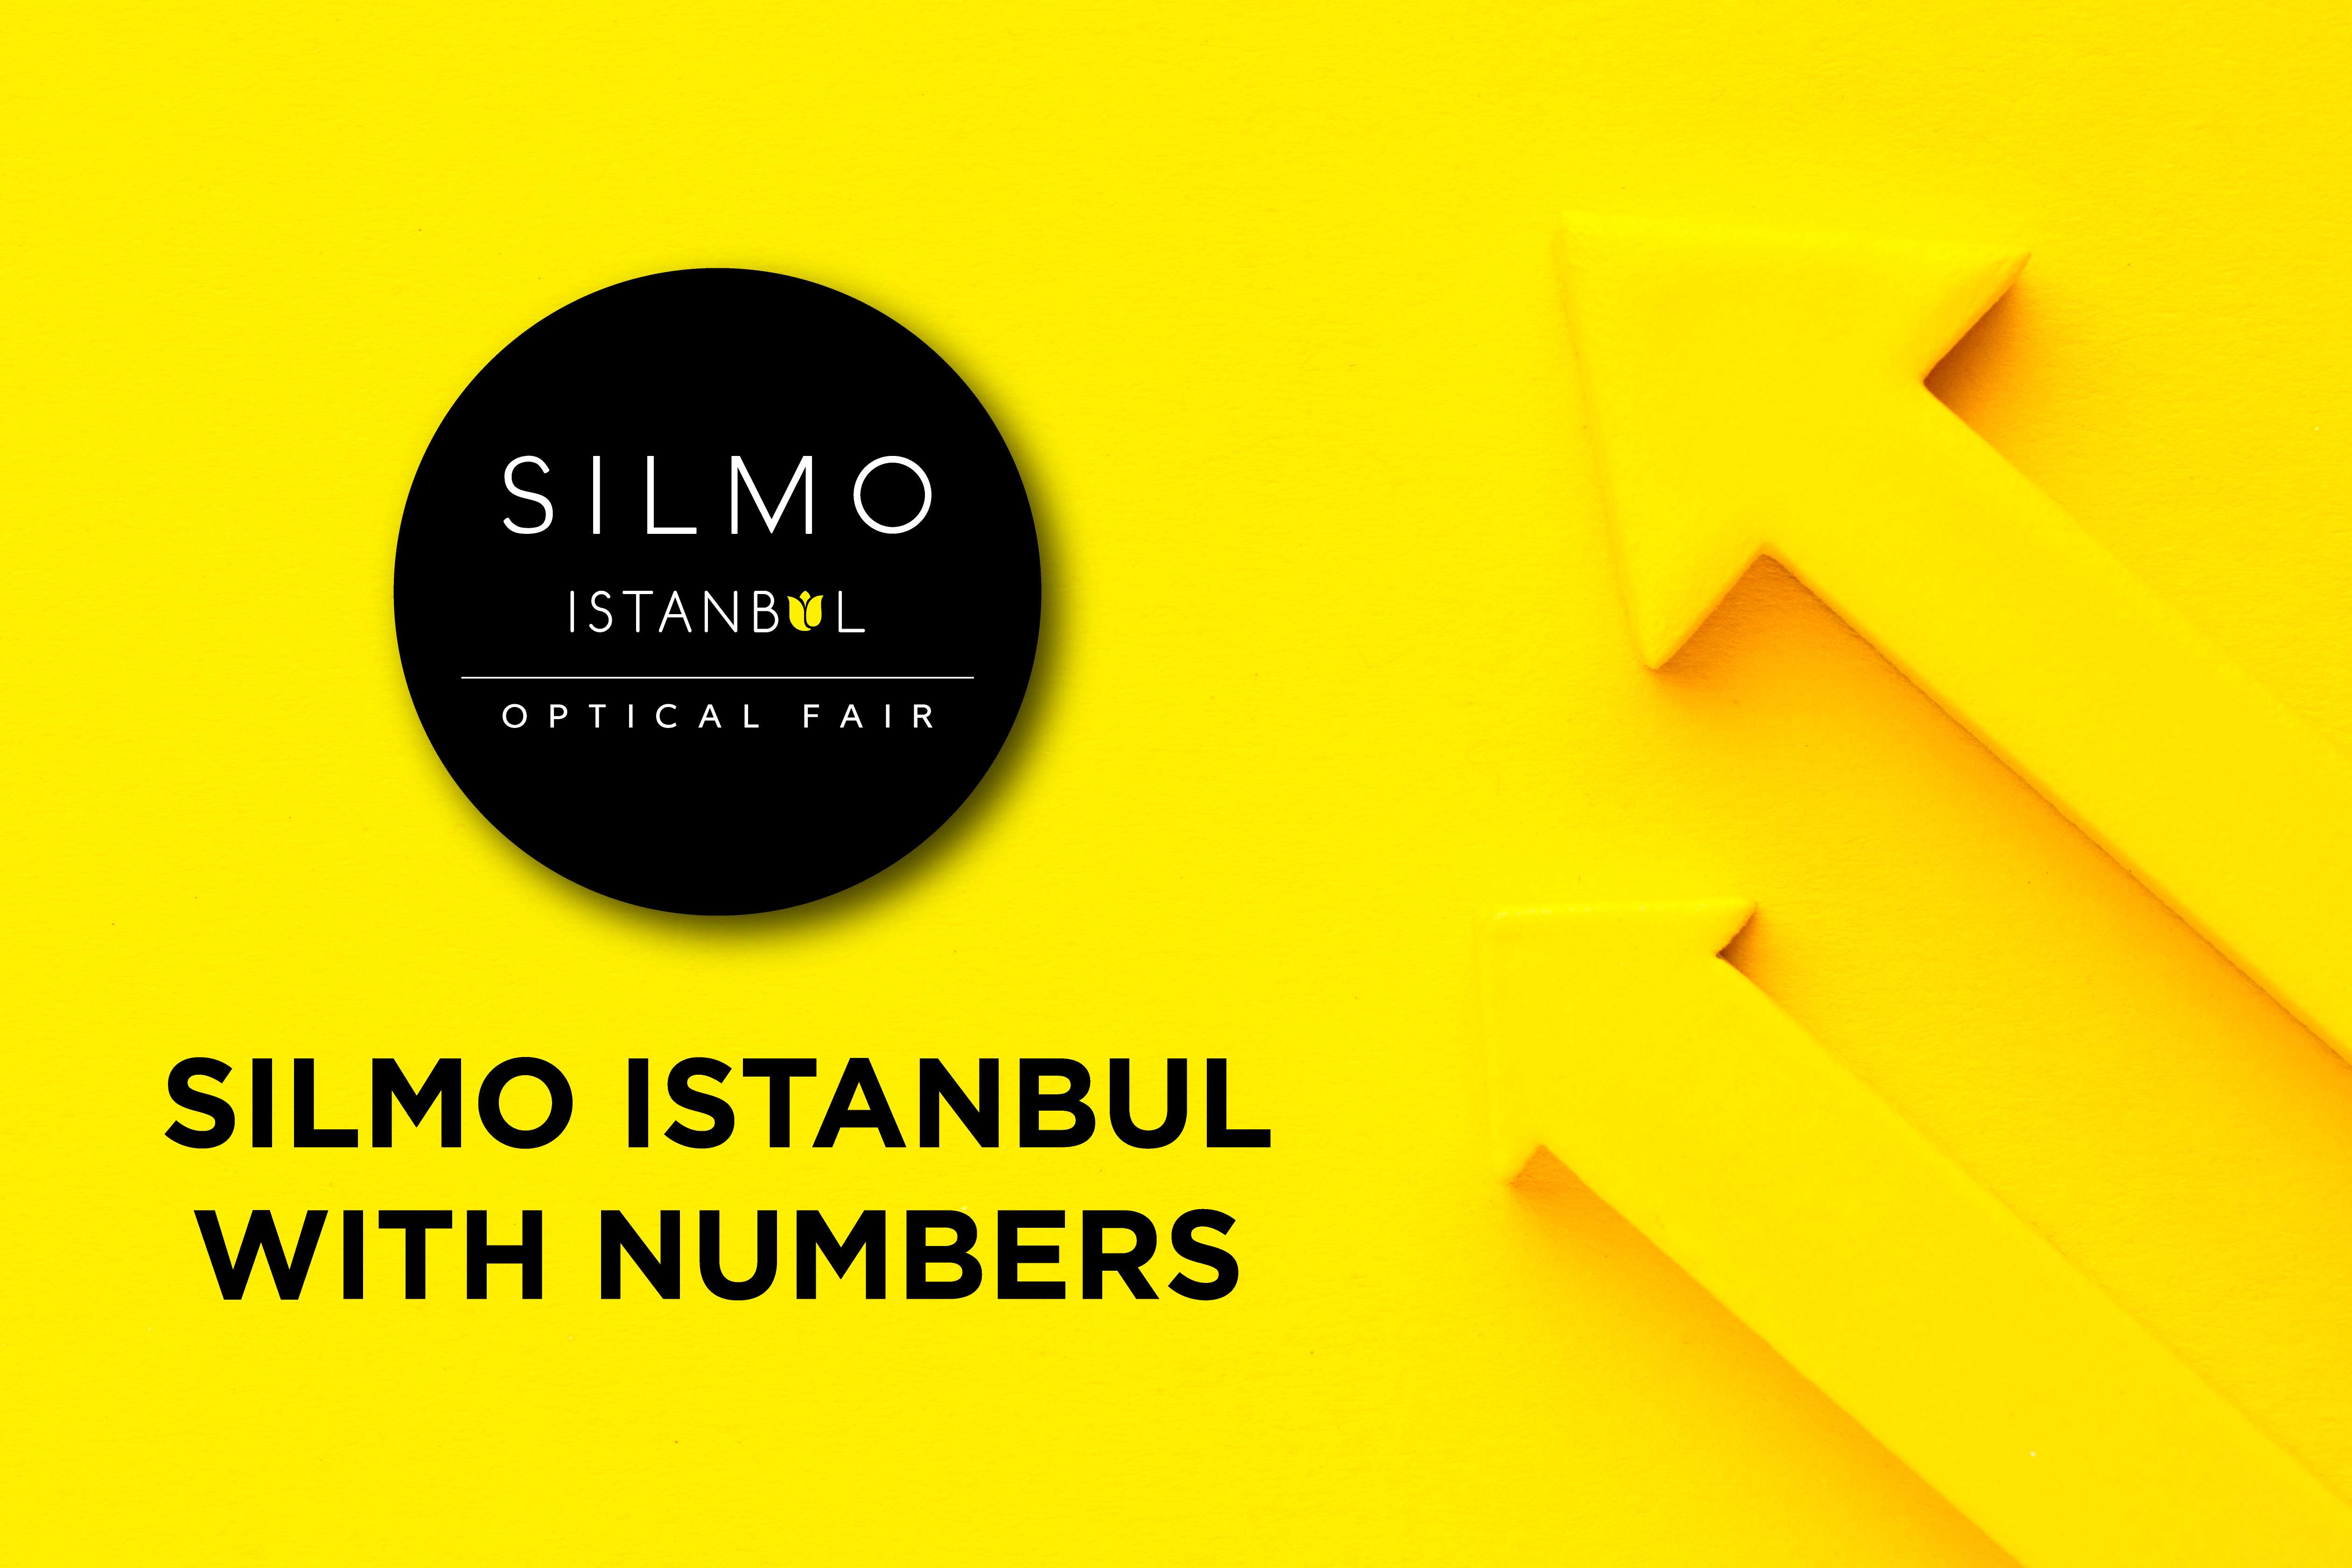 SILMO ISTANBUL WITH NUMBERS